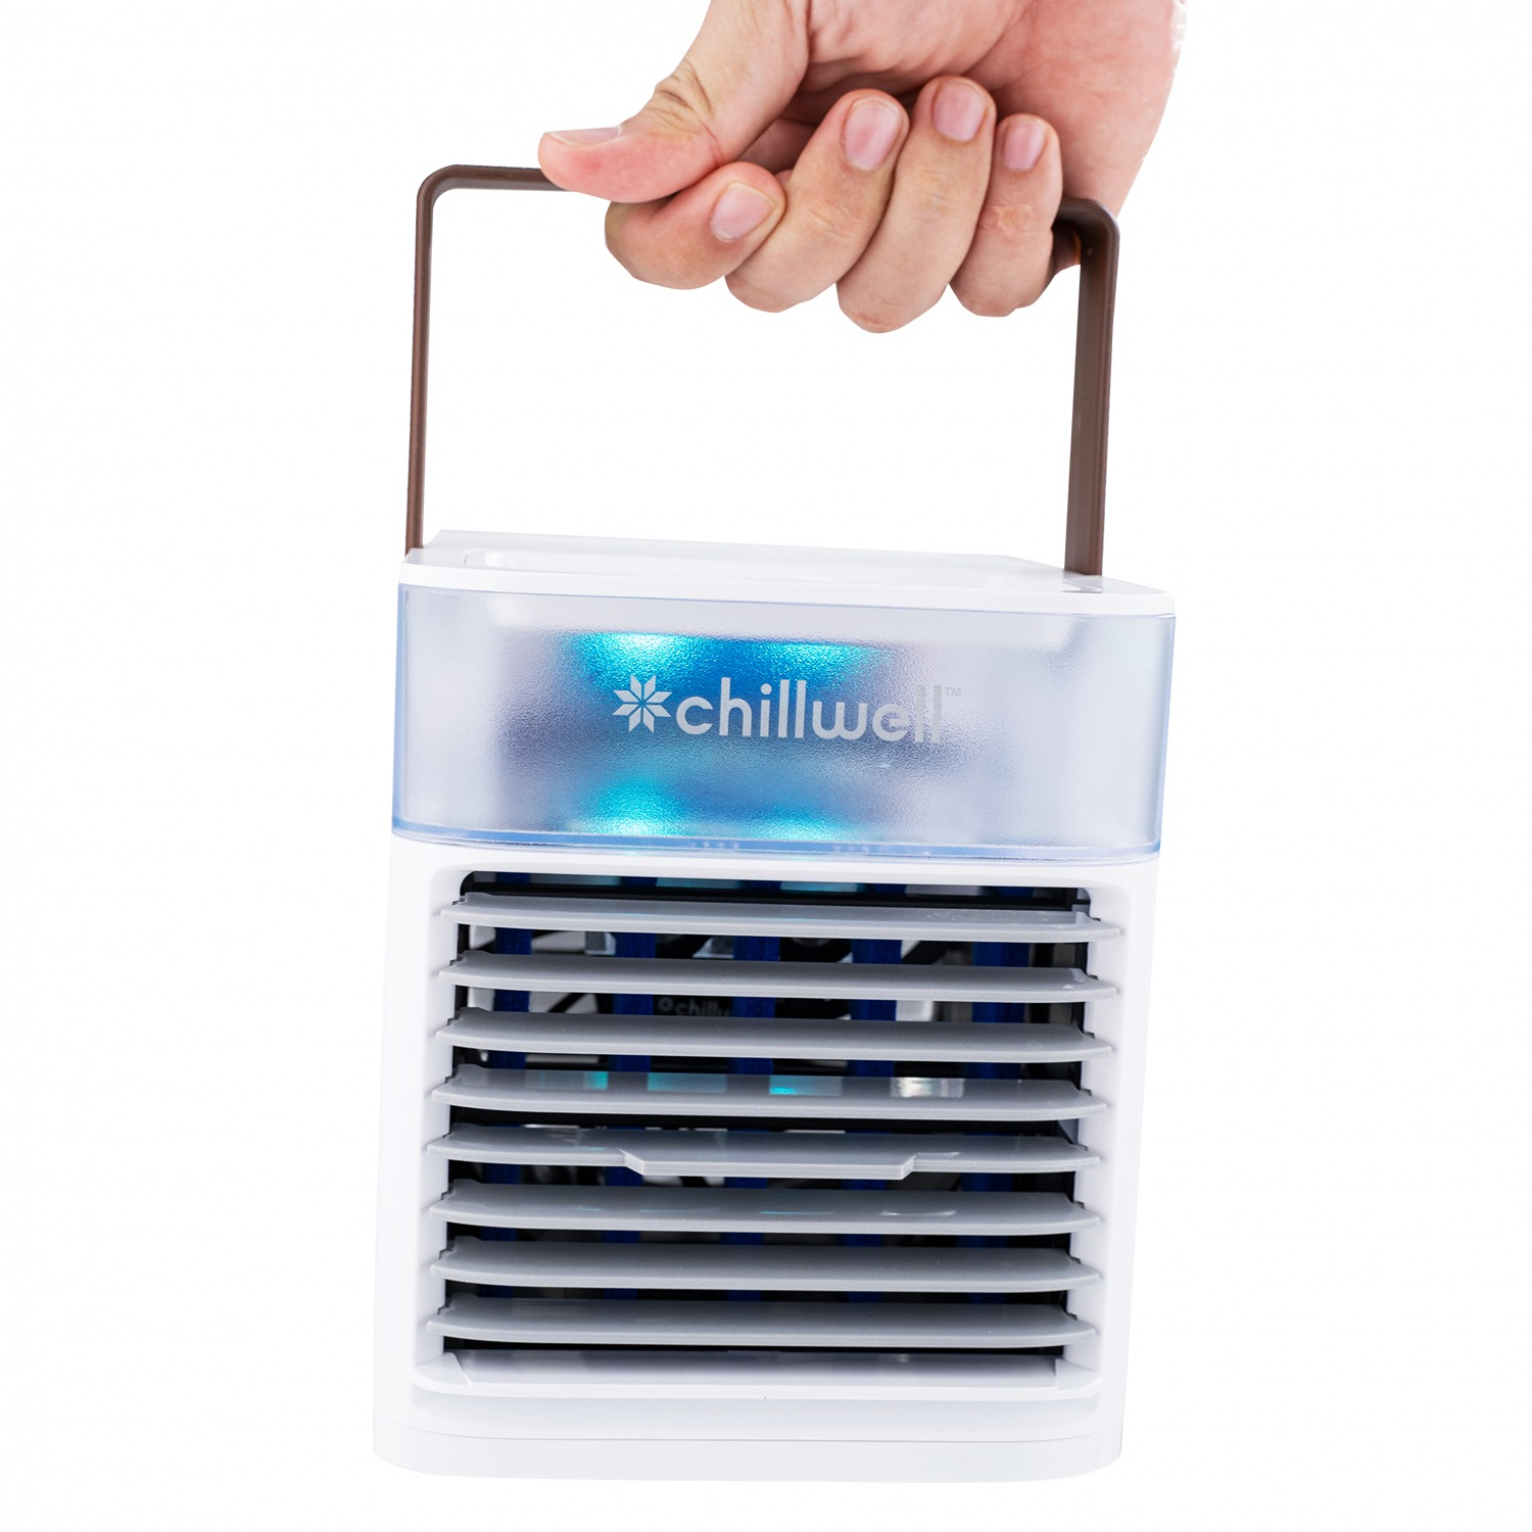 Chilwell Portable Air Conditioner Reviews